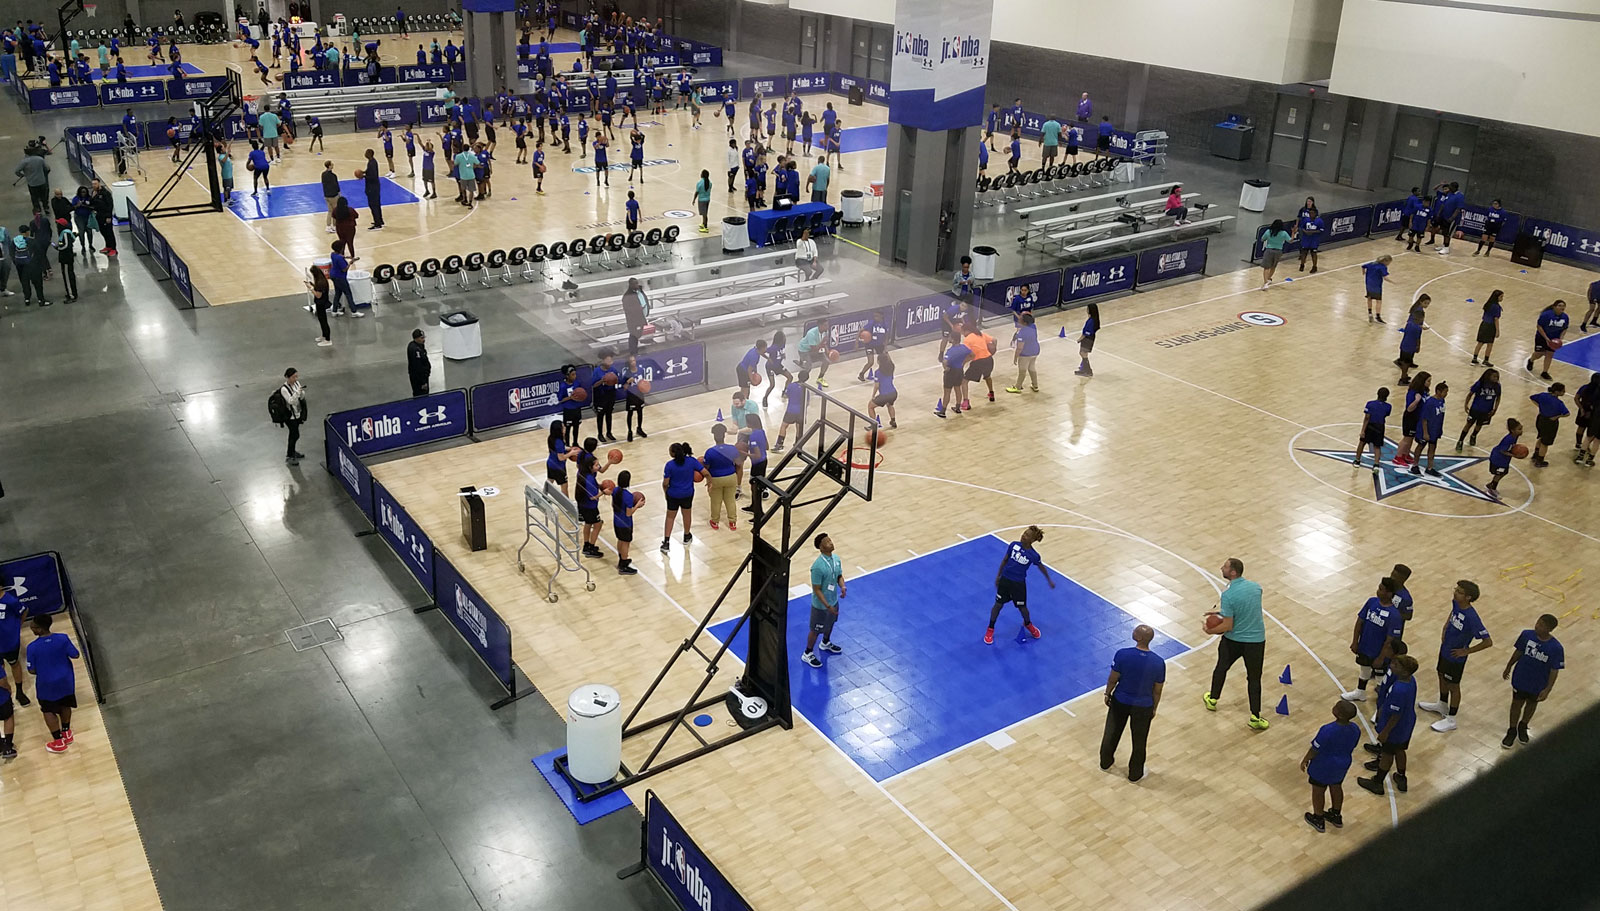 Overhead view of the Maple Tuffshield courts provided by SnapSports